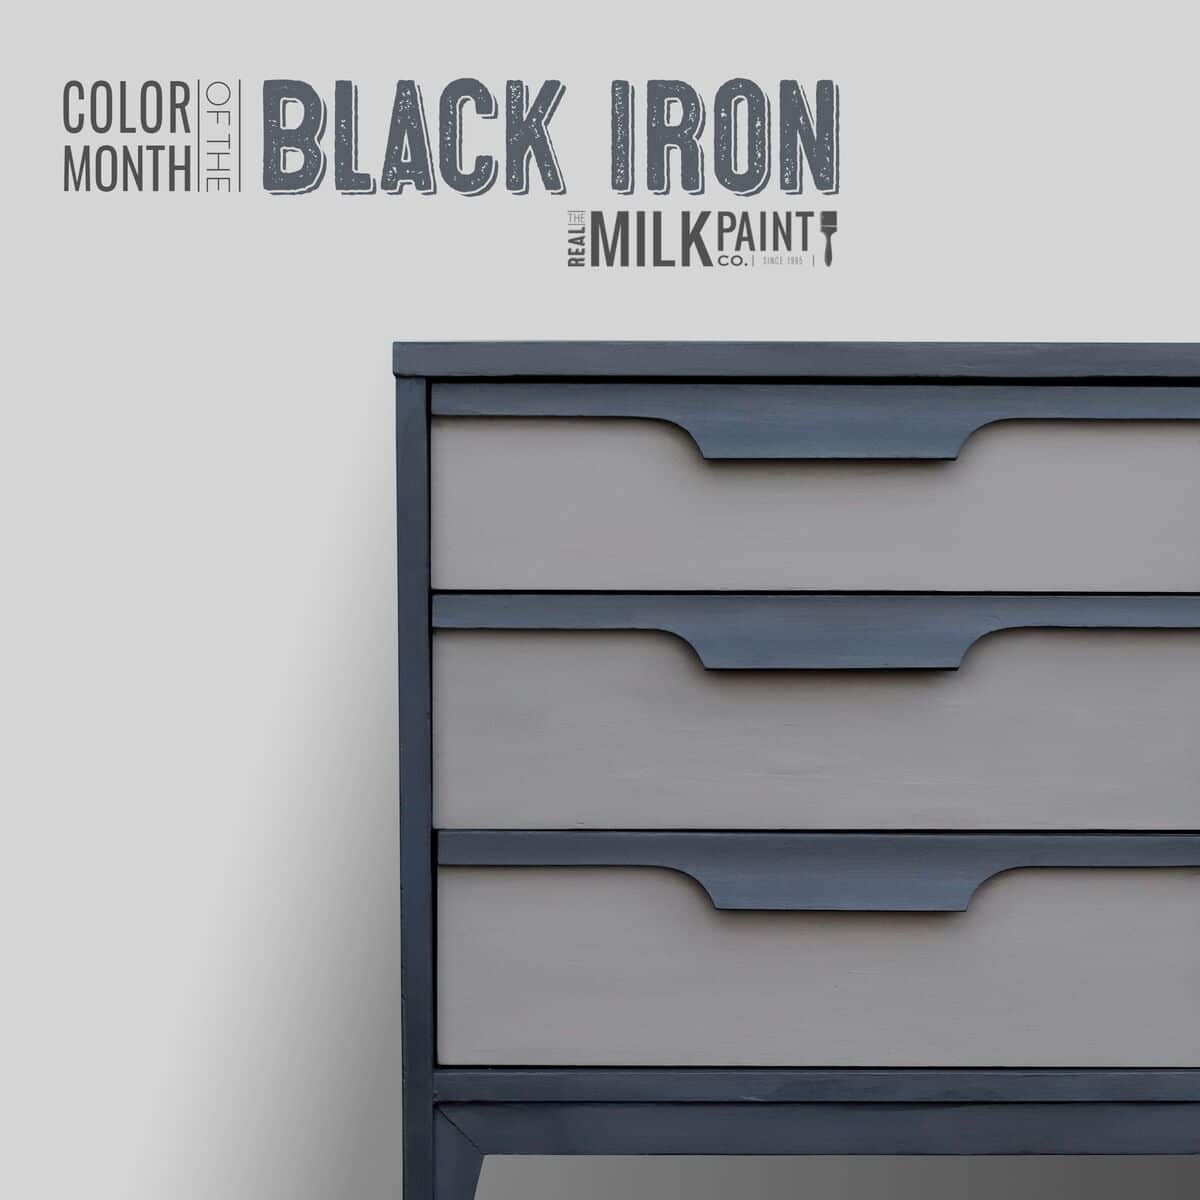 Real Milk Paint's color of the month: Black Iron